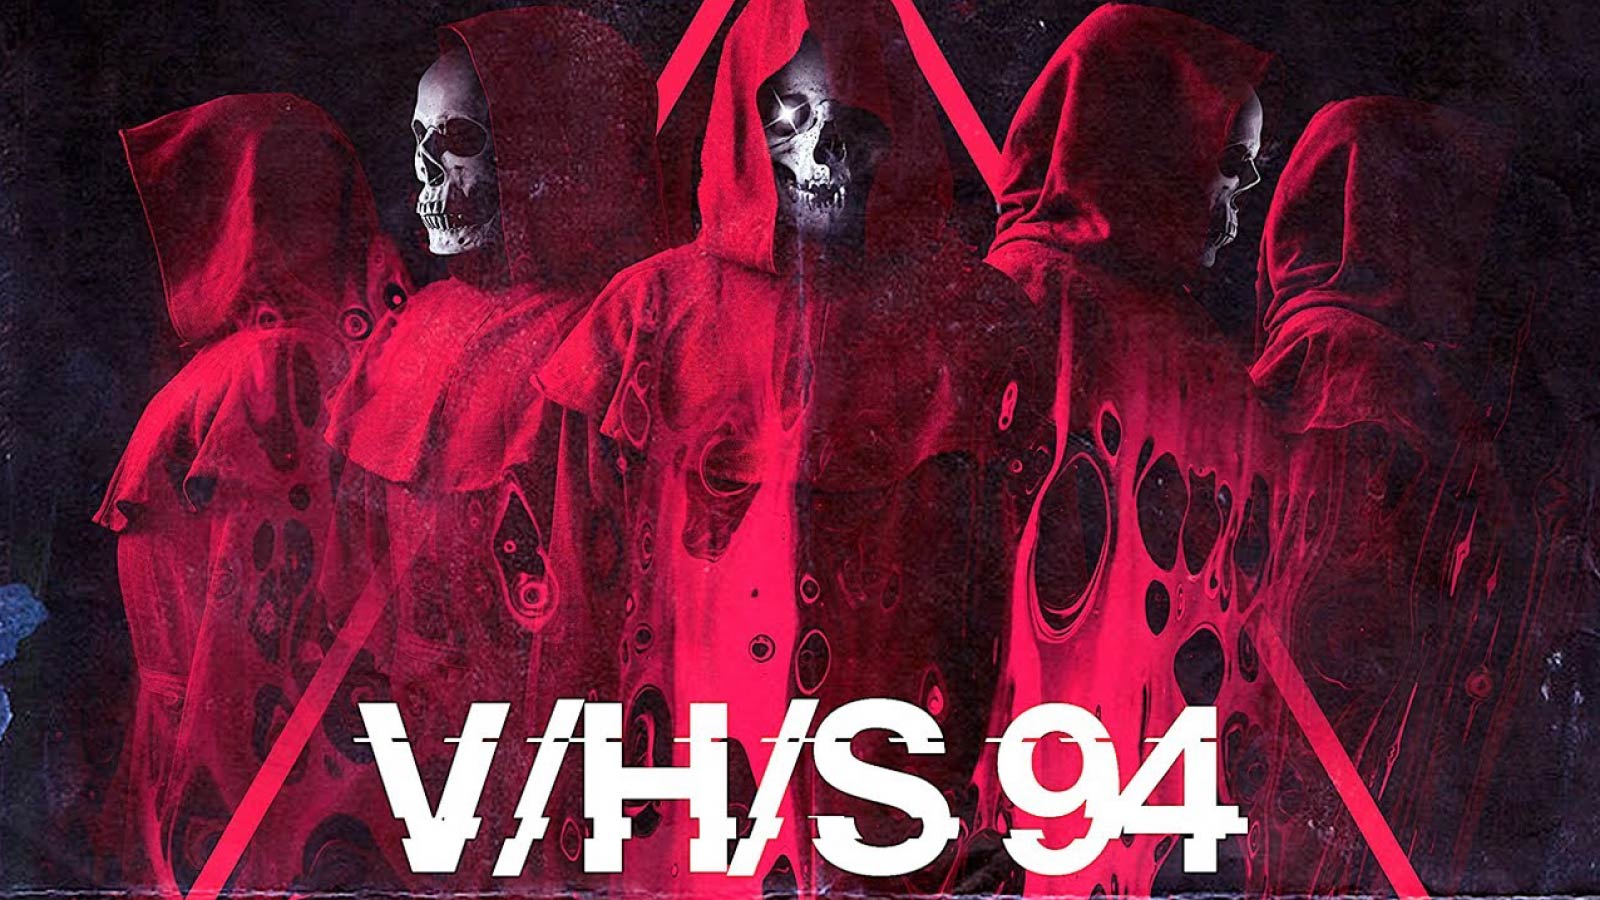 vhs94 best horror movies to watch while high on halloween